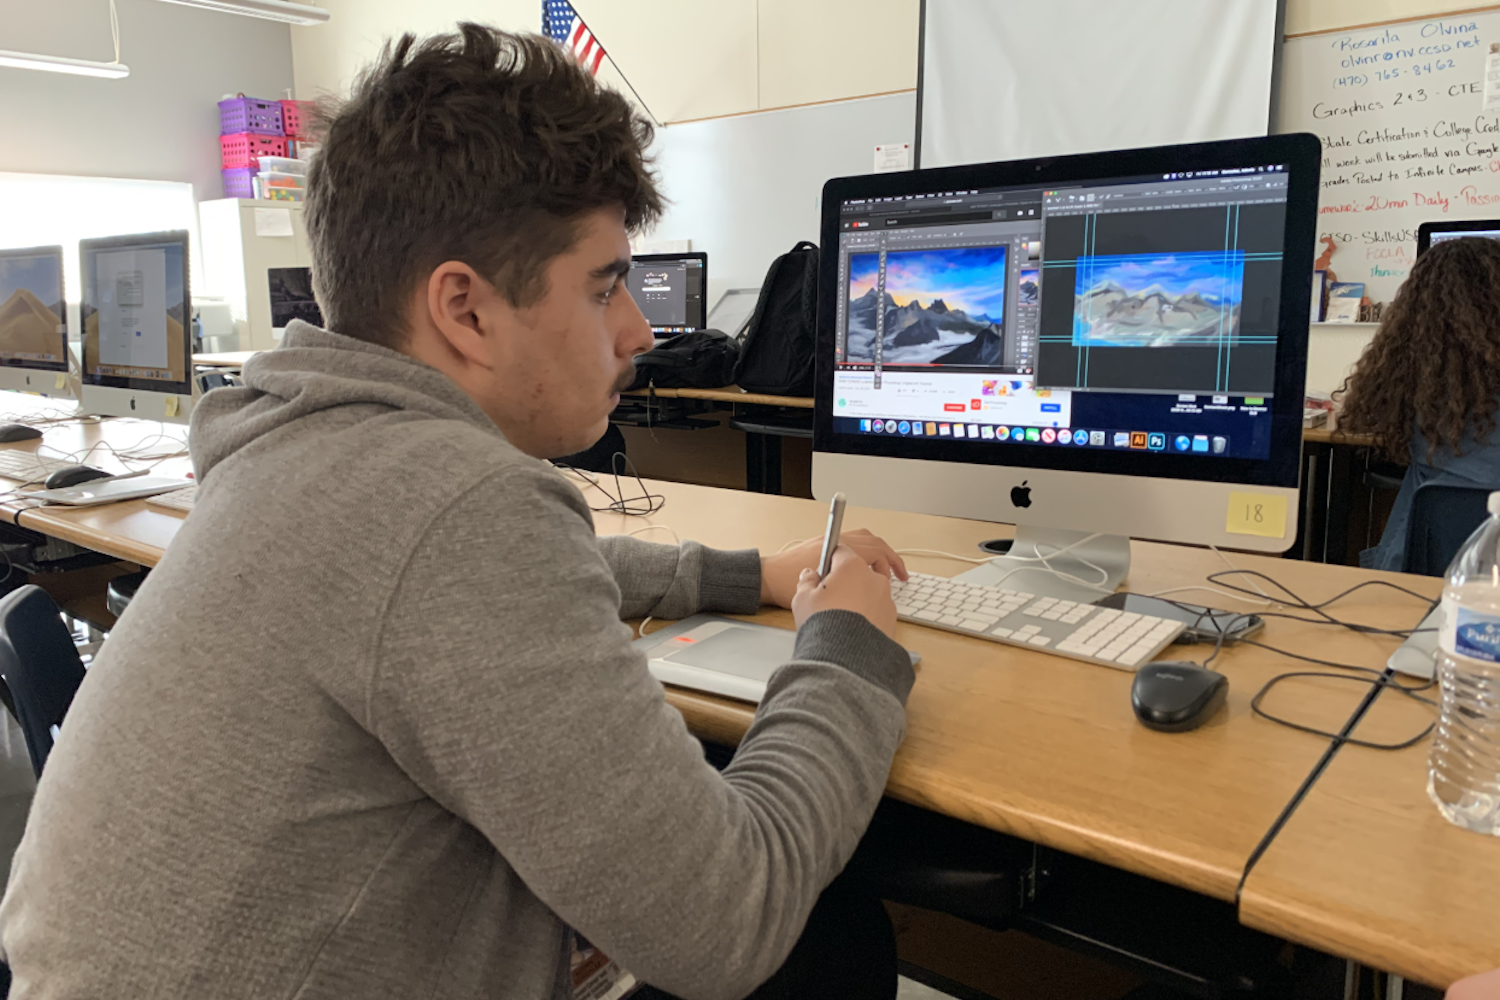 Graphic Design III seniors integrate drawing tablets